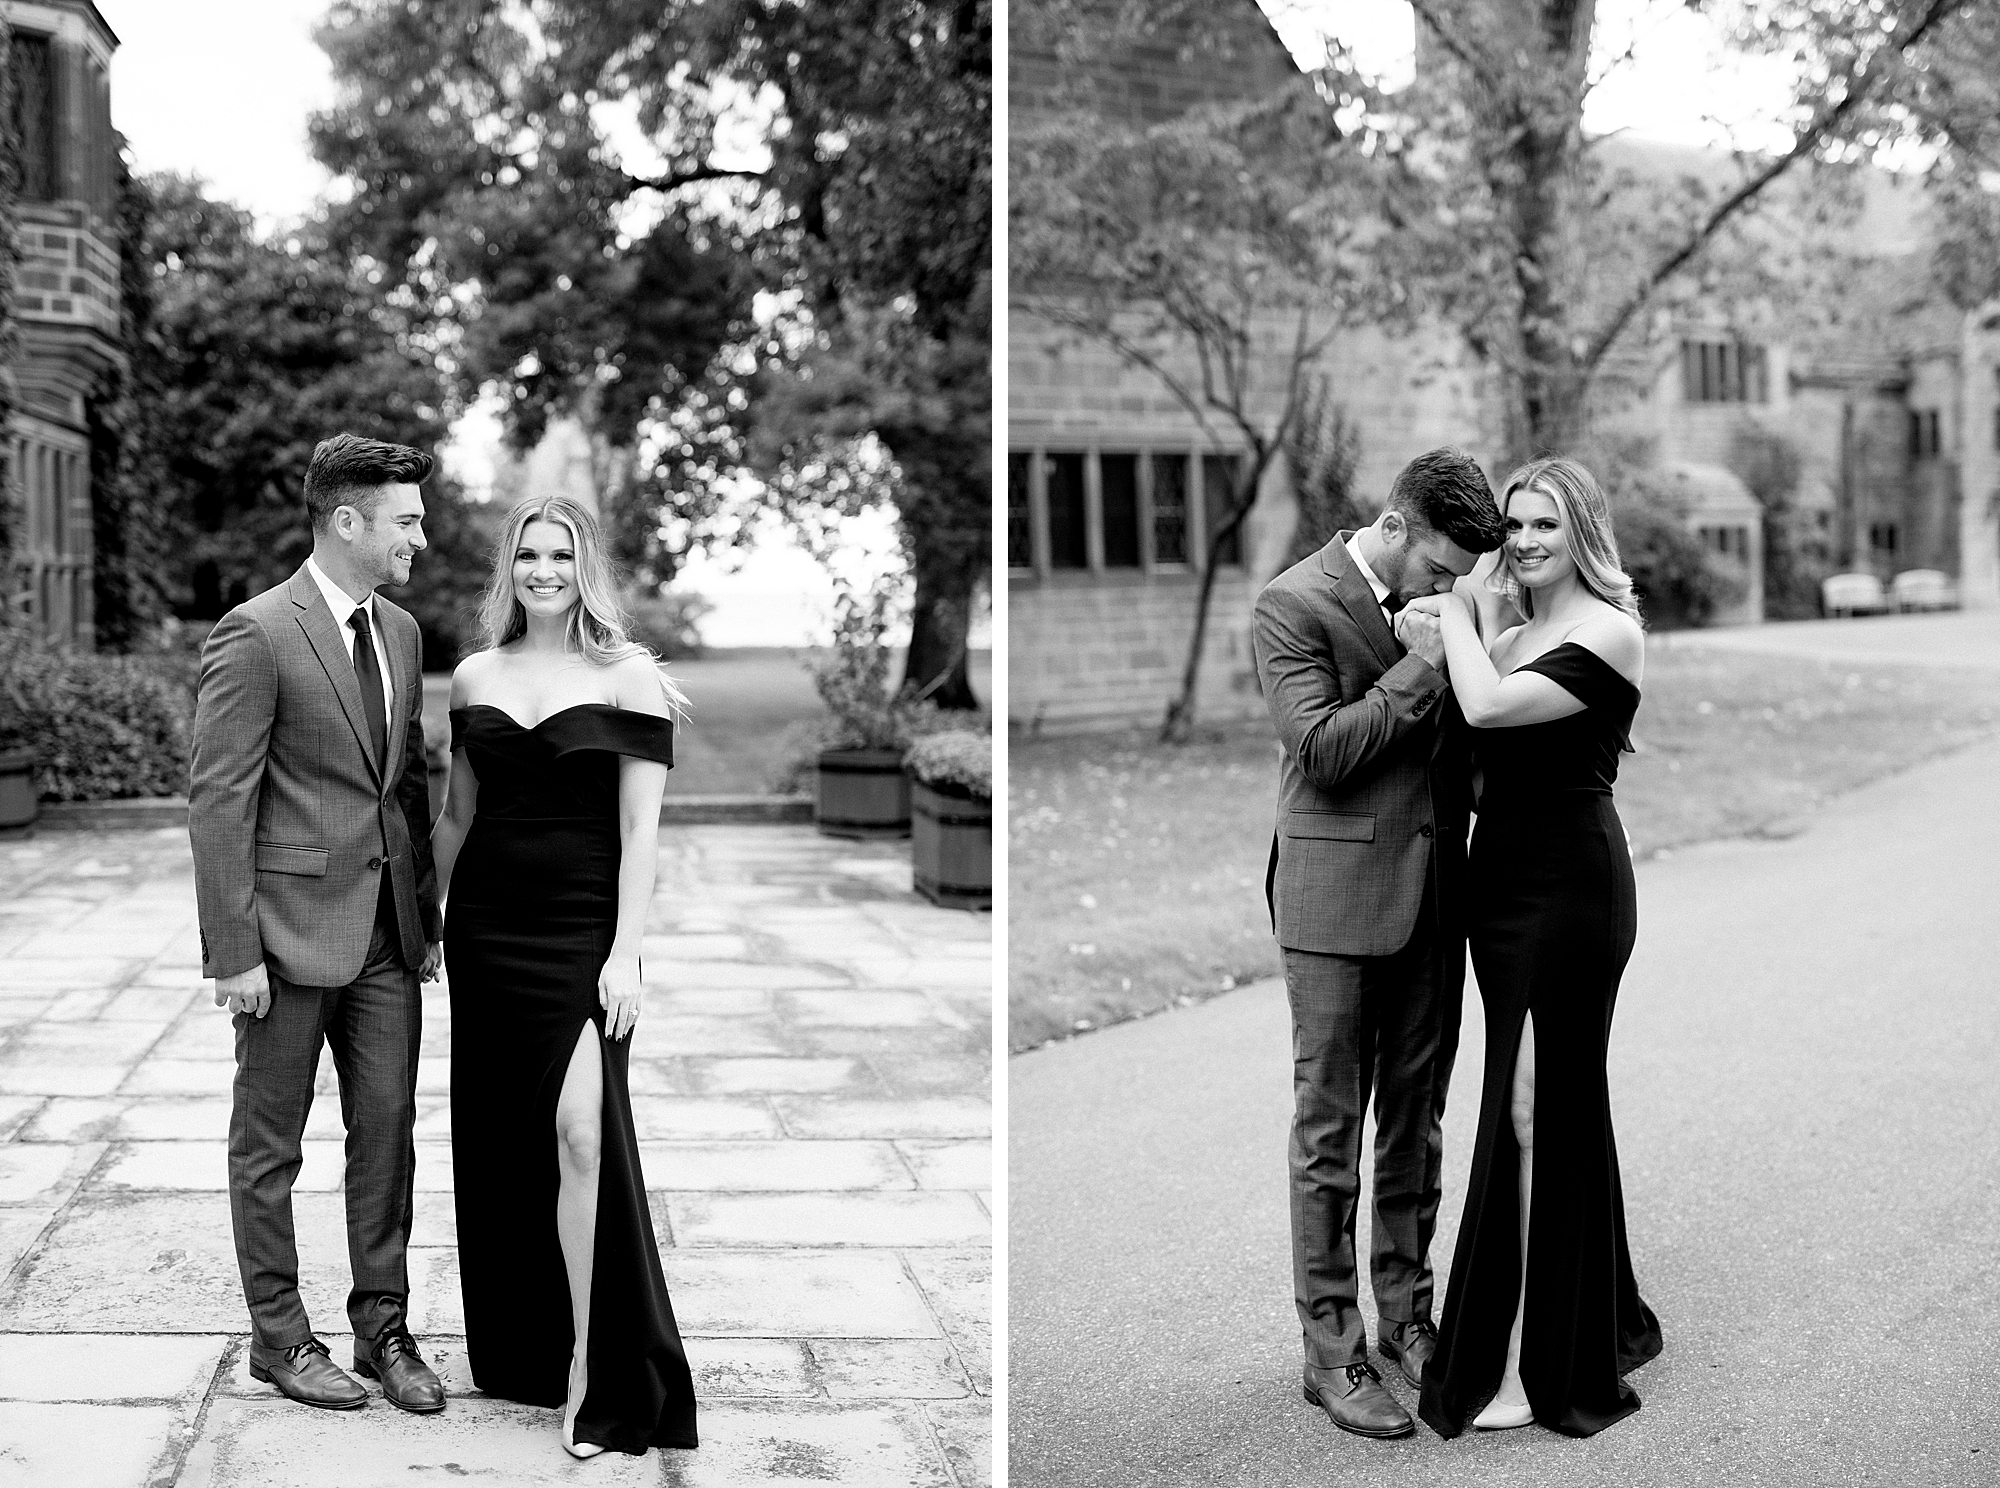 Black and white formal engagement photos | Breanne Rochelle Photography